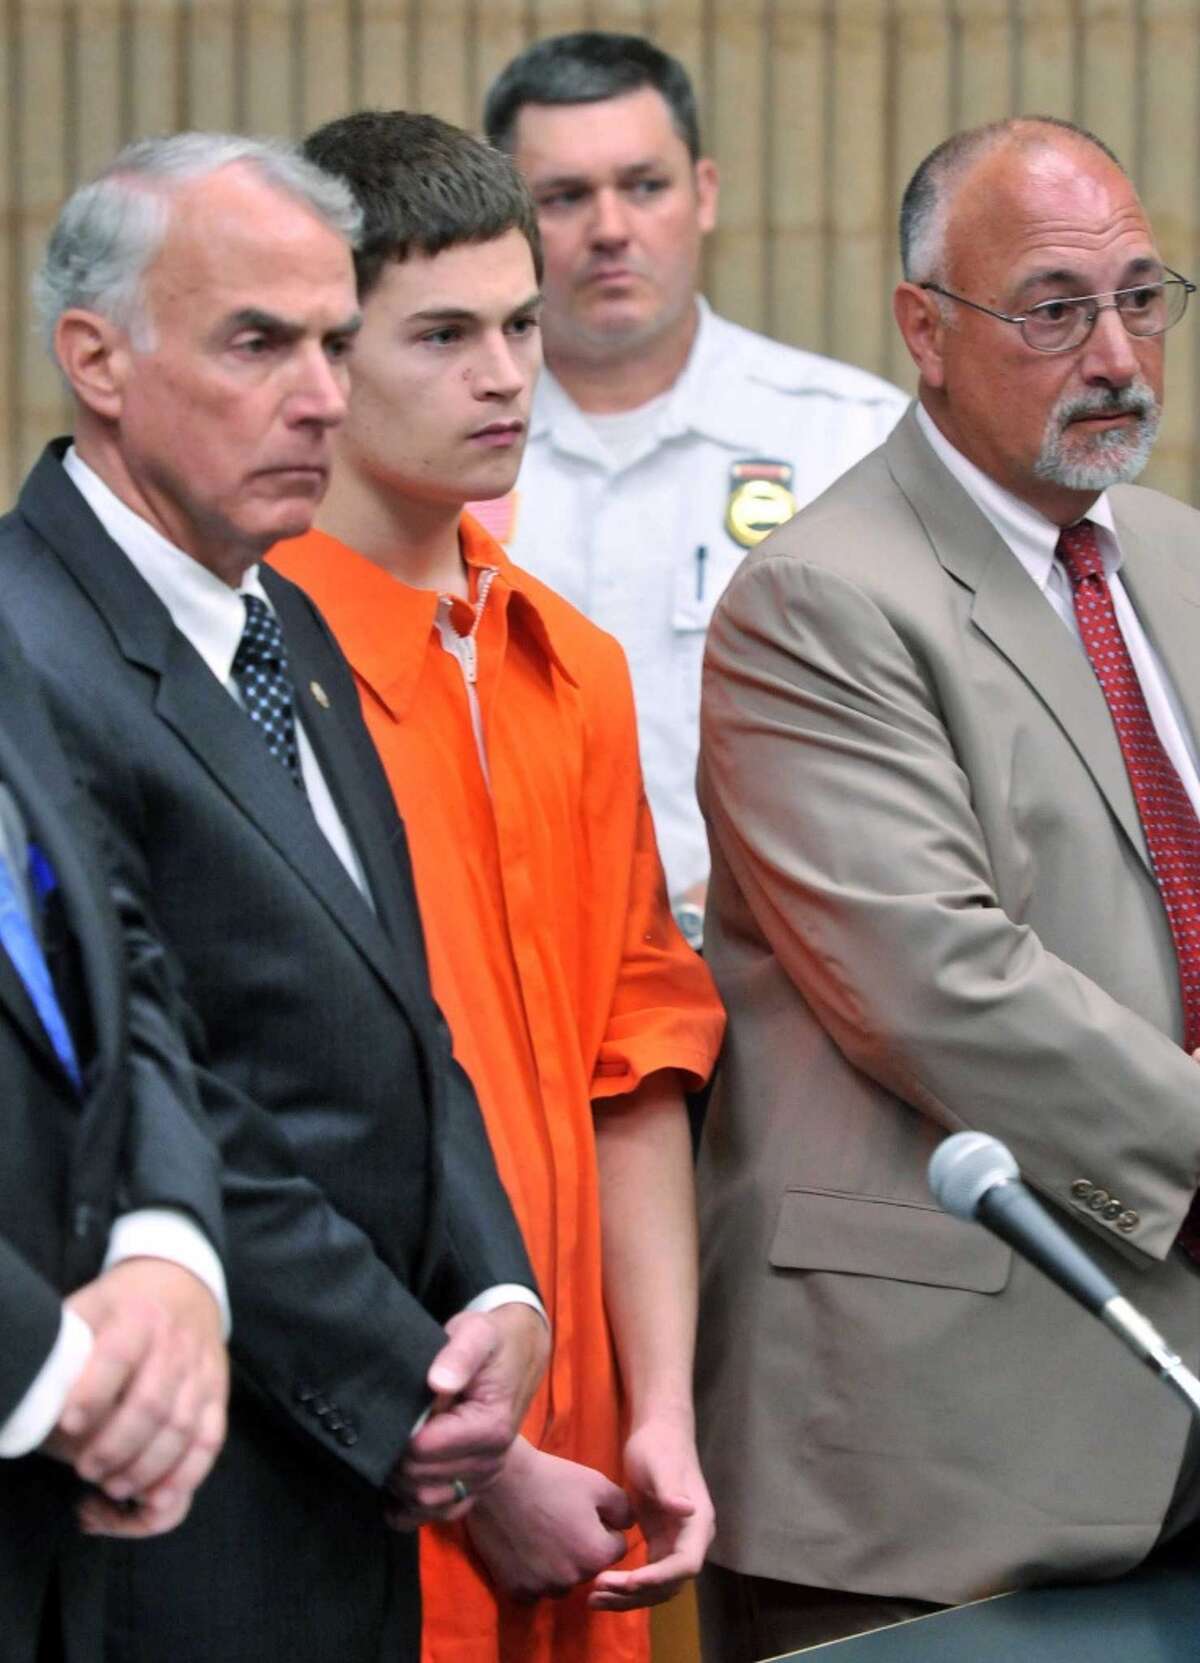 Christopher Plaskon, 18, second from left, appears in Superior Court in Milford, Conn., on Wednesday, June 4, 2014. Plaskon, charged with stabbing a classmate to death in school on their prom day, pleaded not guilty to murder Wednesday as his attorney said he was investigating a possible mental health defense. At left is Plaskon's uncle and guardian Paul Healy, and attorney Richard Meehan Jr., stands at right.